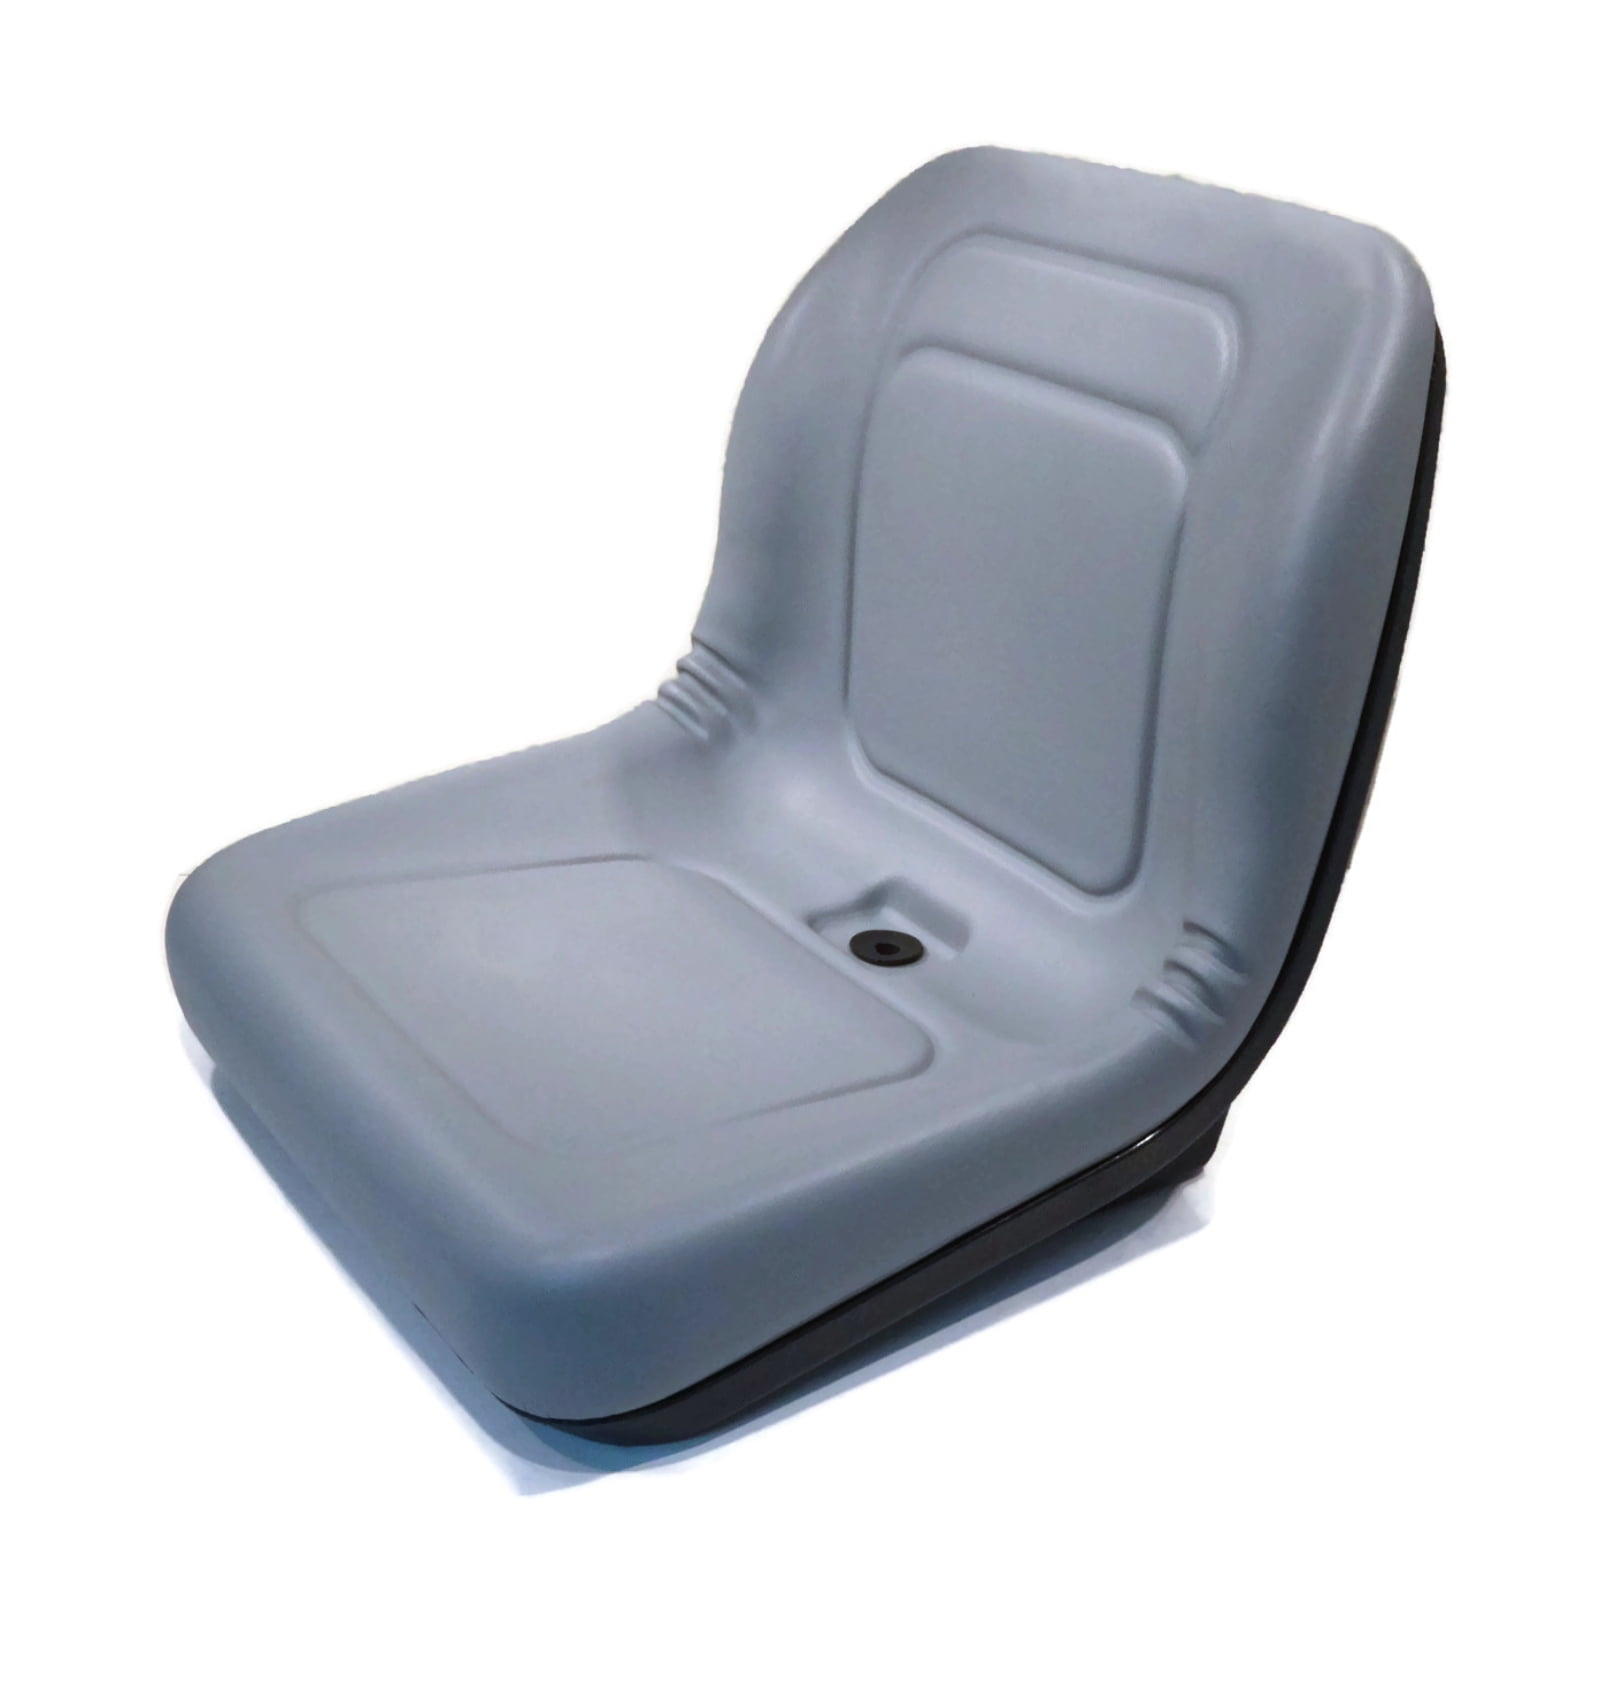 HIGH BACK SEATS for Toro Workman MD HD 2100 2300 4300 UTV Utility Vehicle by The ROP Shop 2 